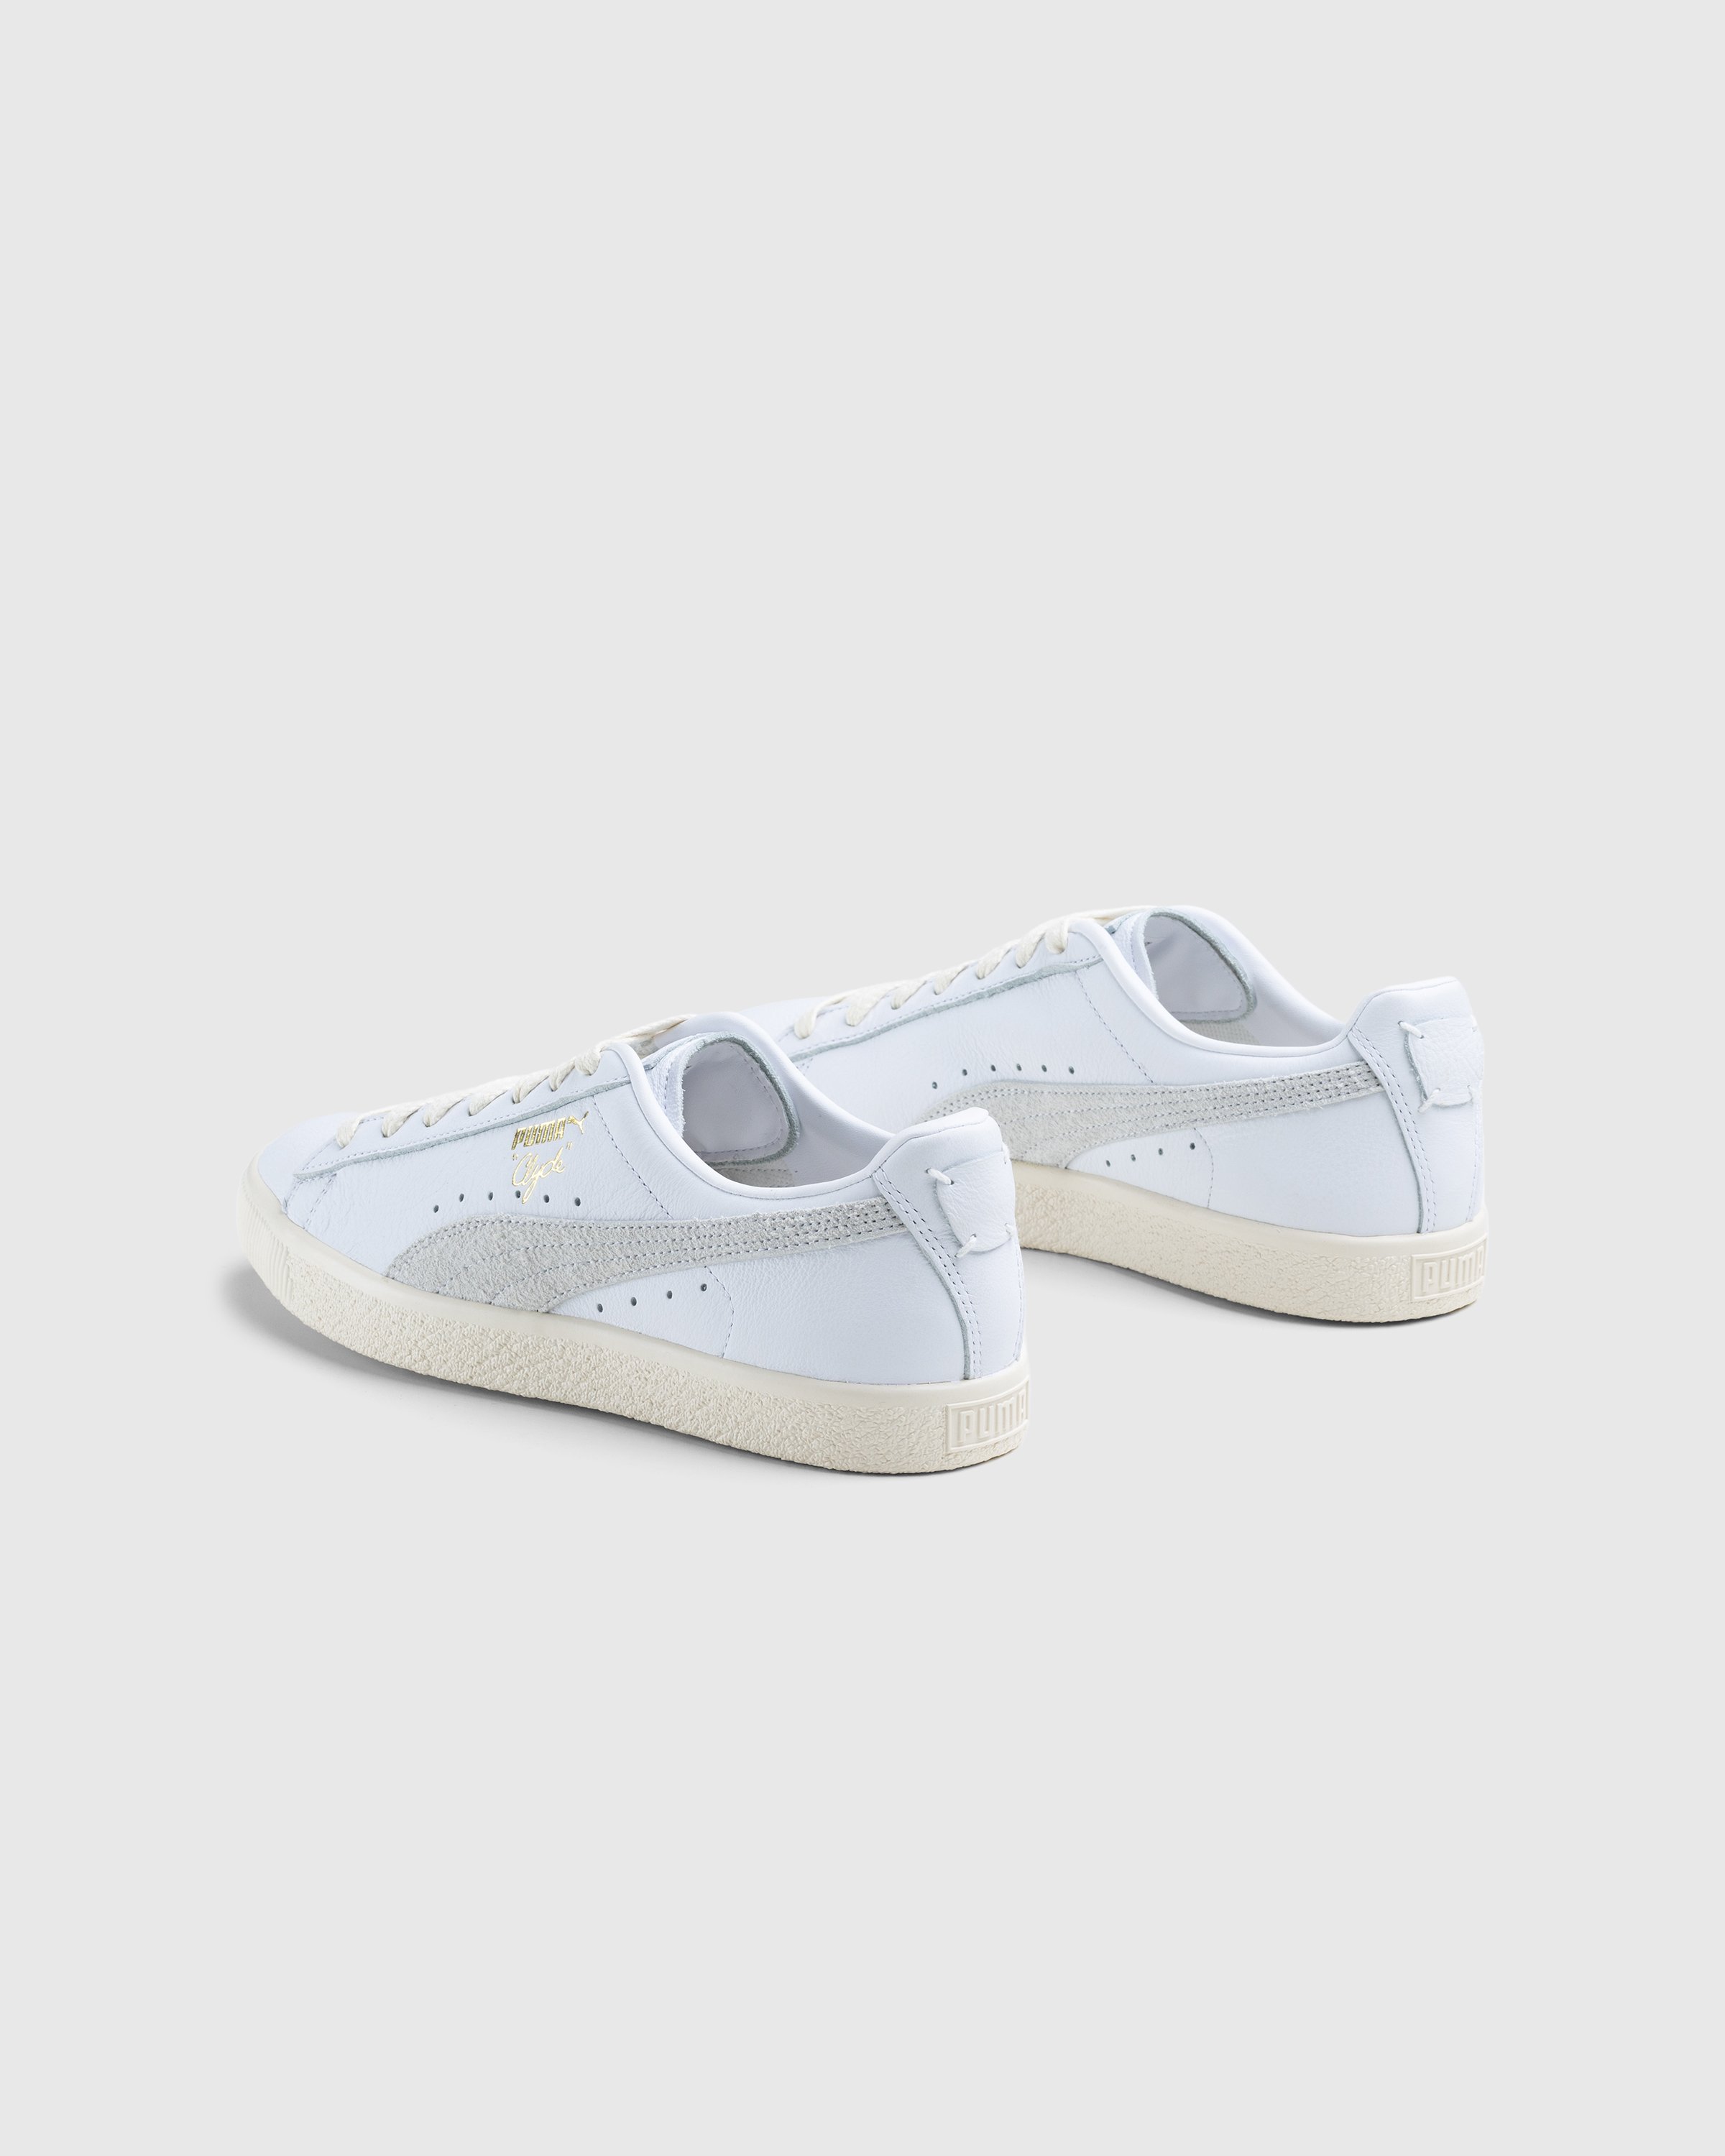 Puma - Clyde Base White - Footwear - White - Image 4